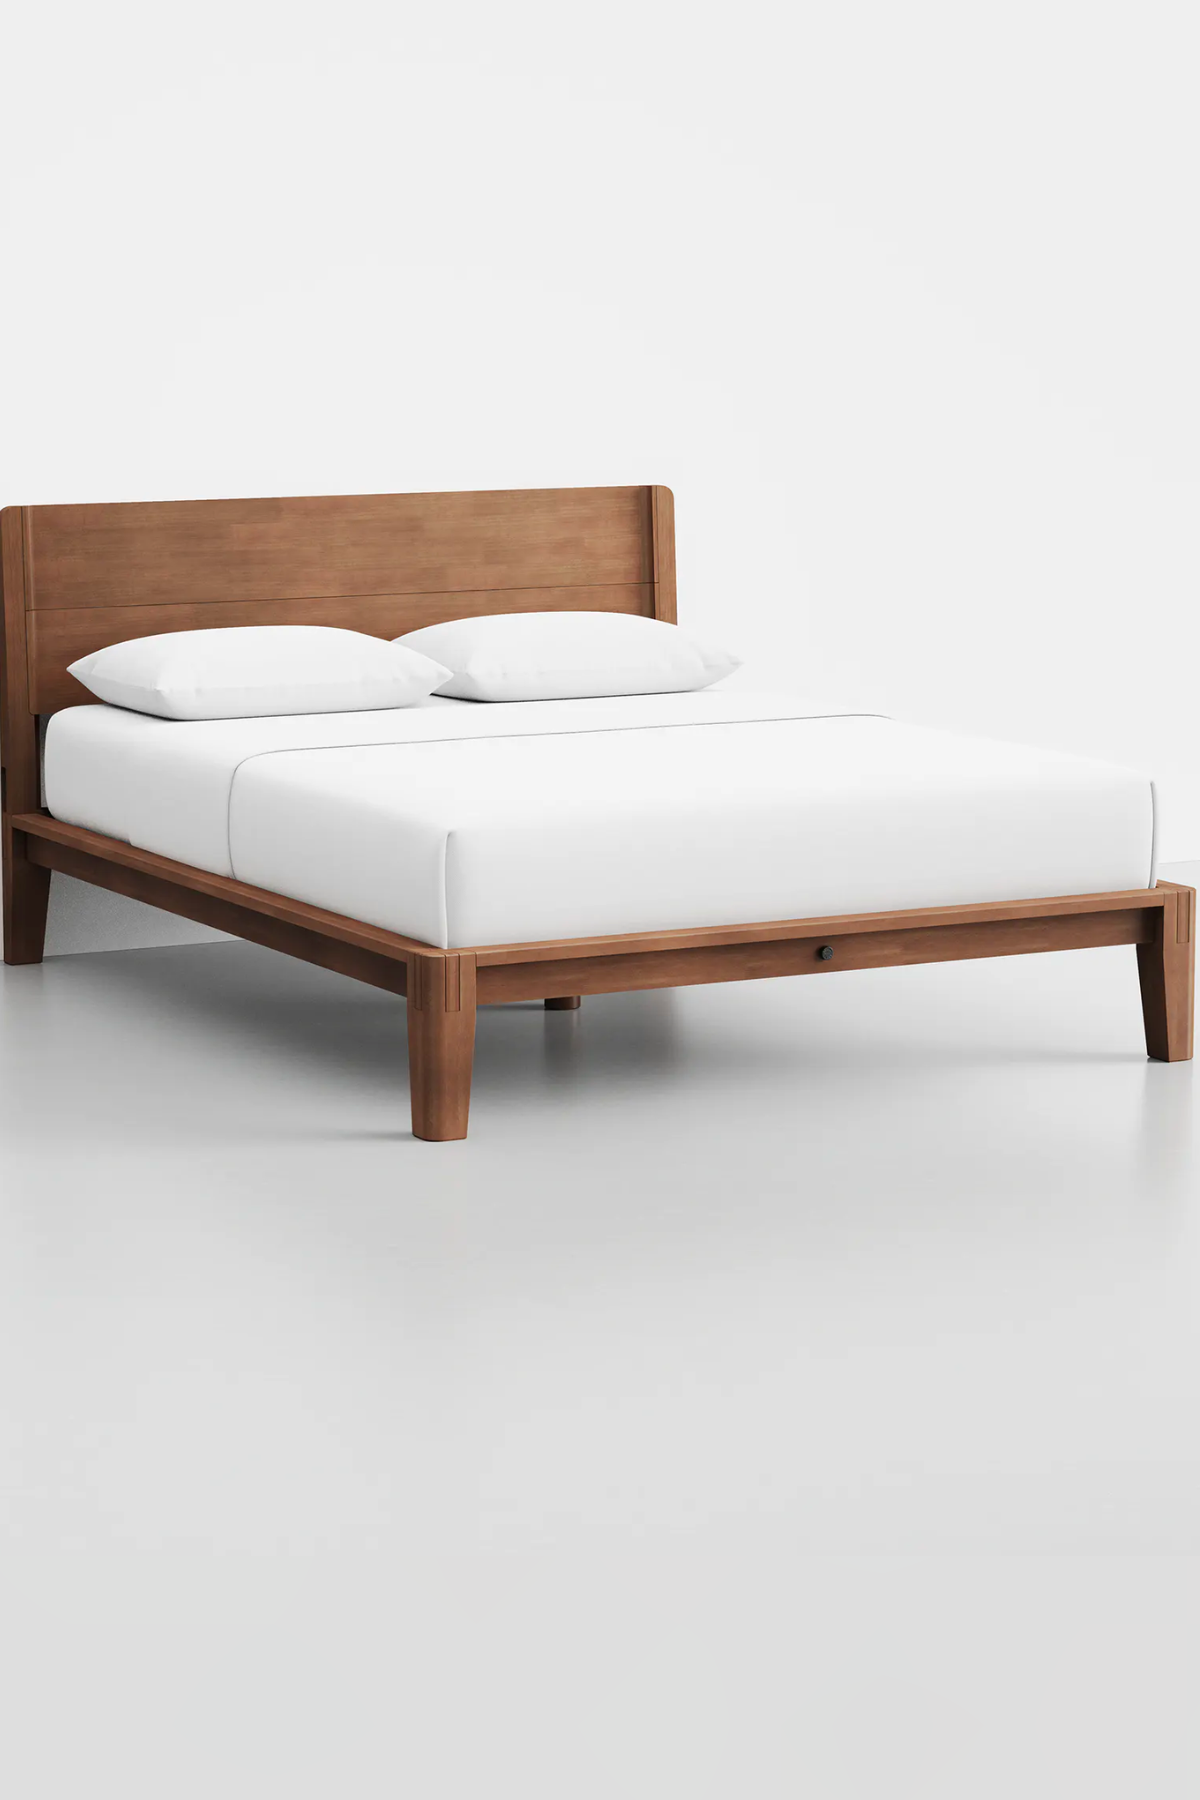 Thuma The Bed Review